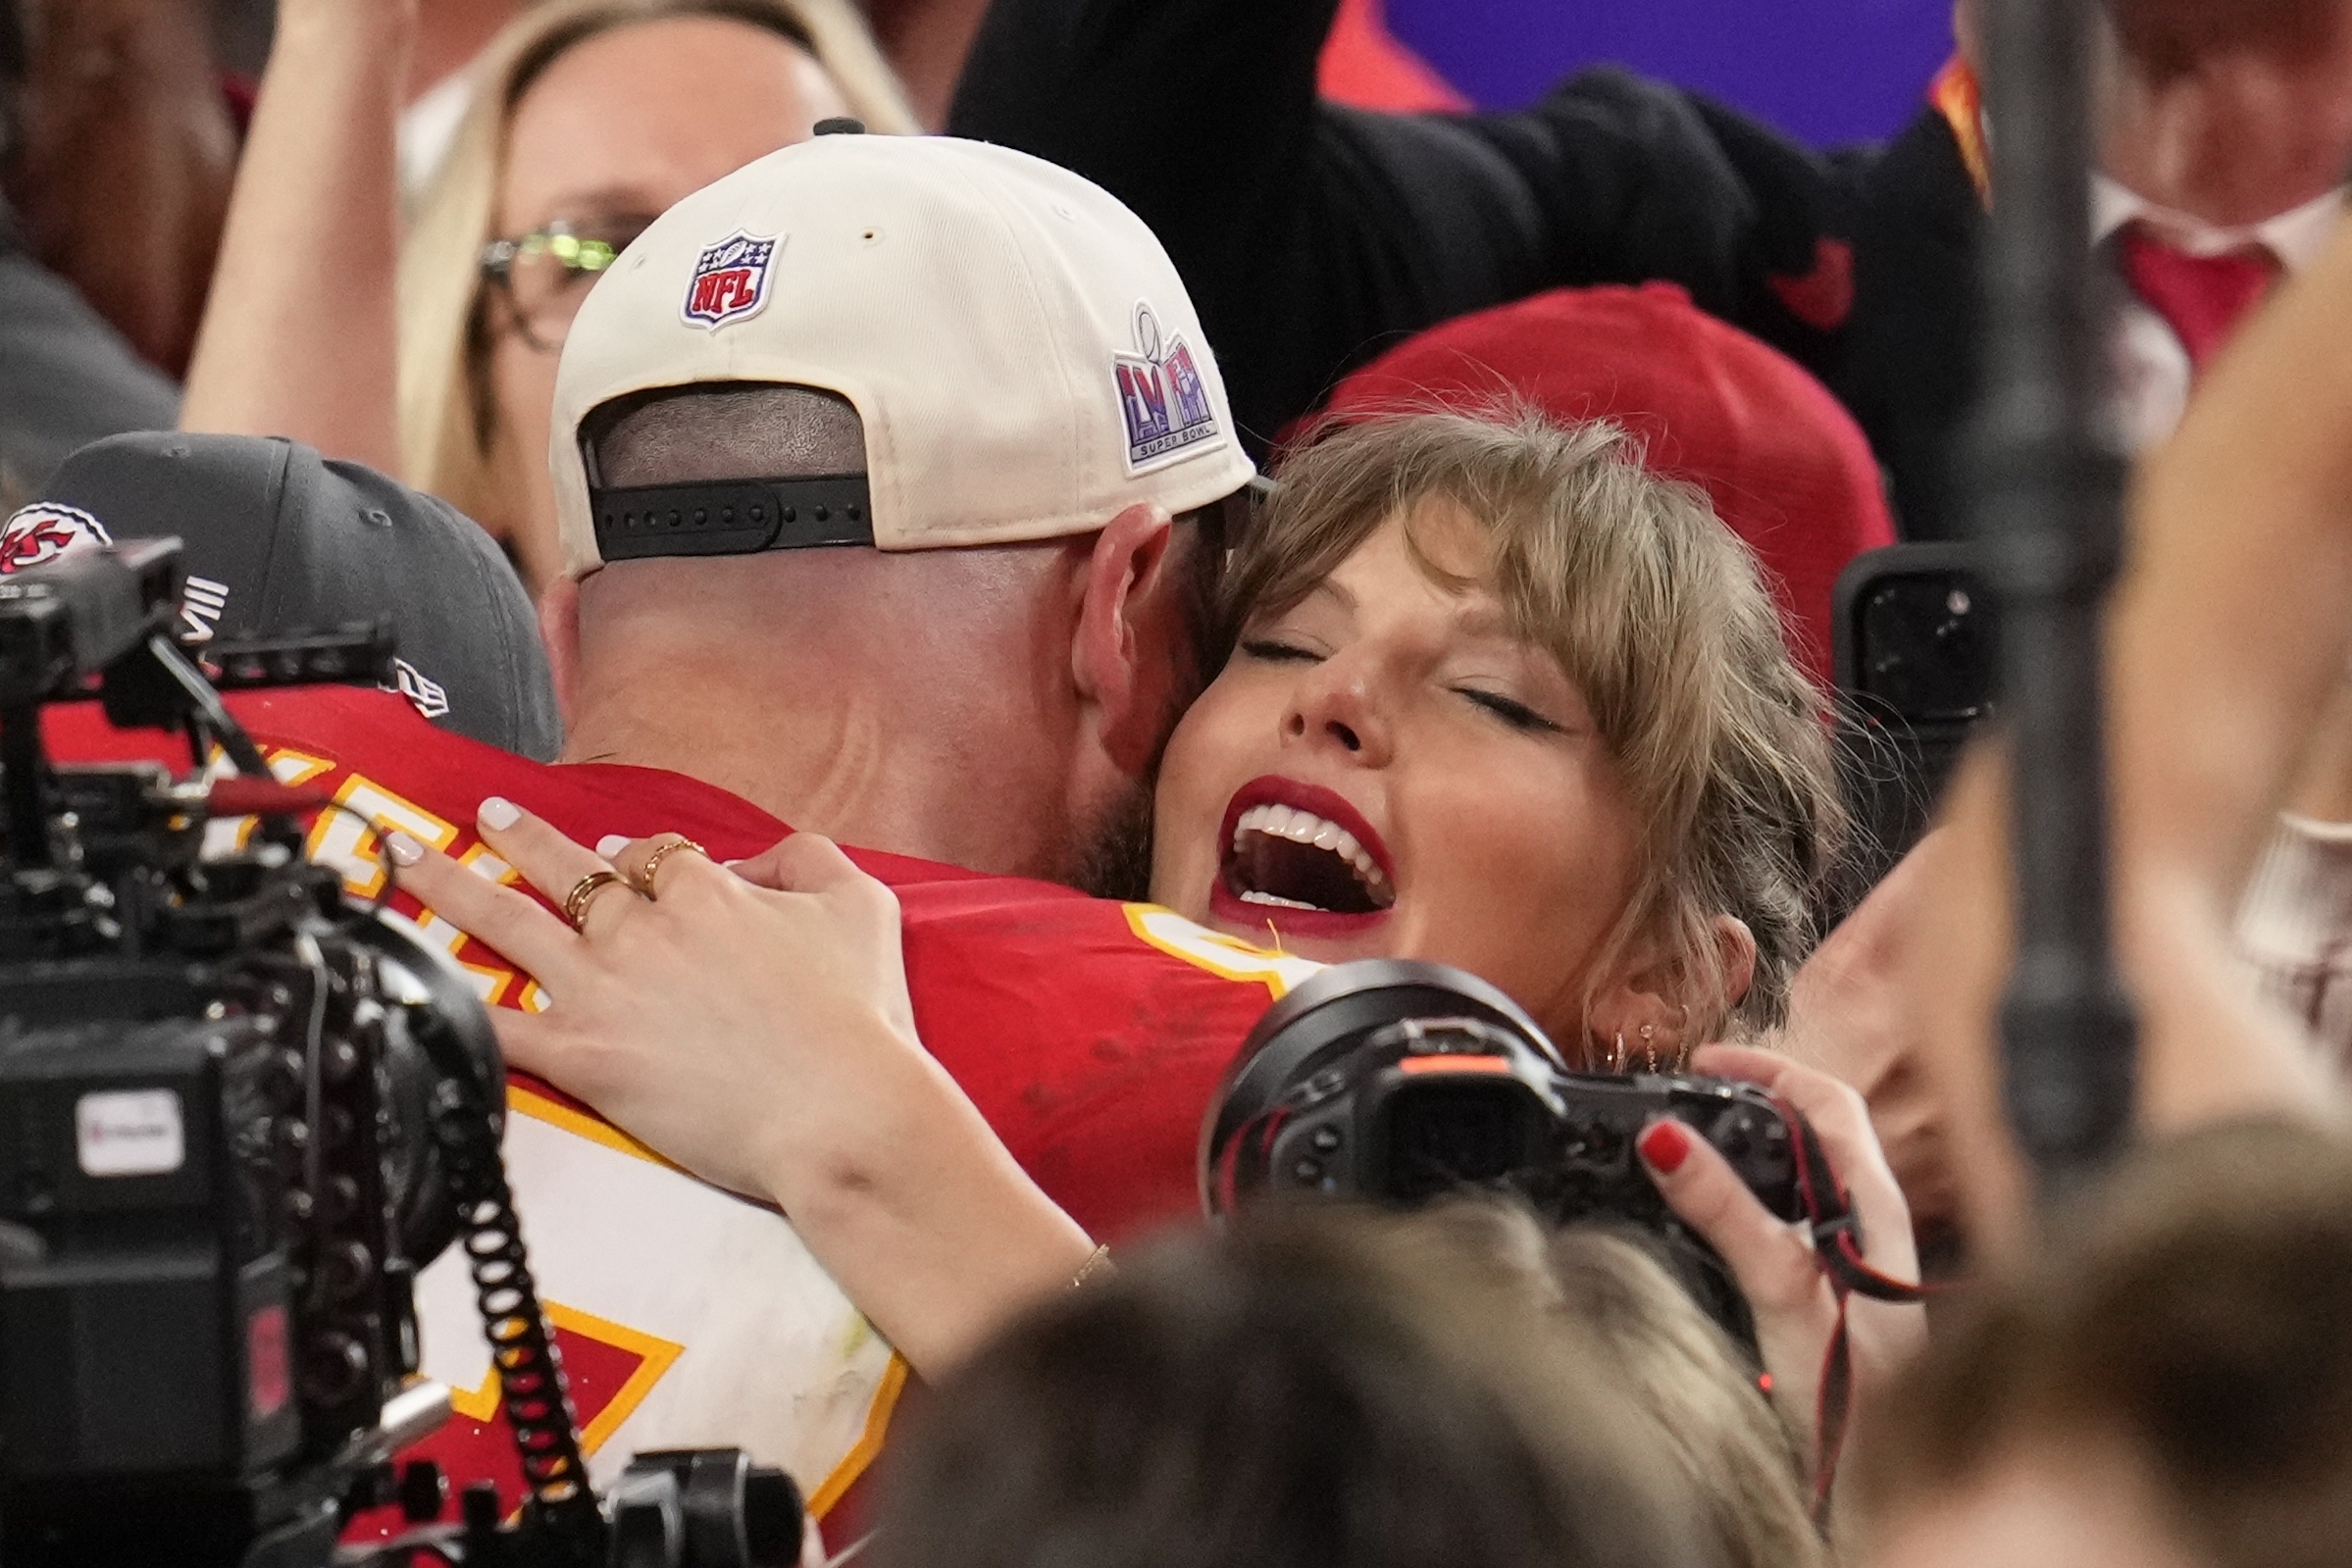 The couple embraced for an extended period while Swift held back tears